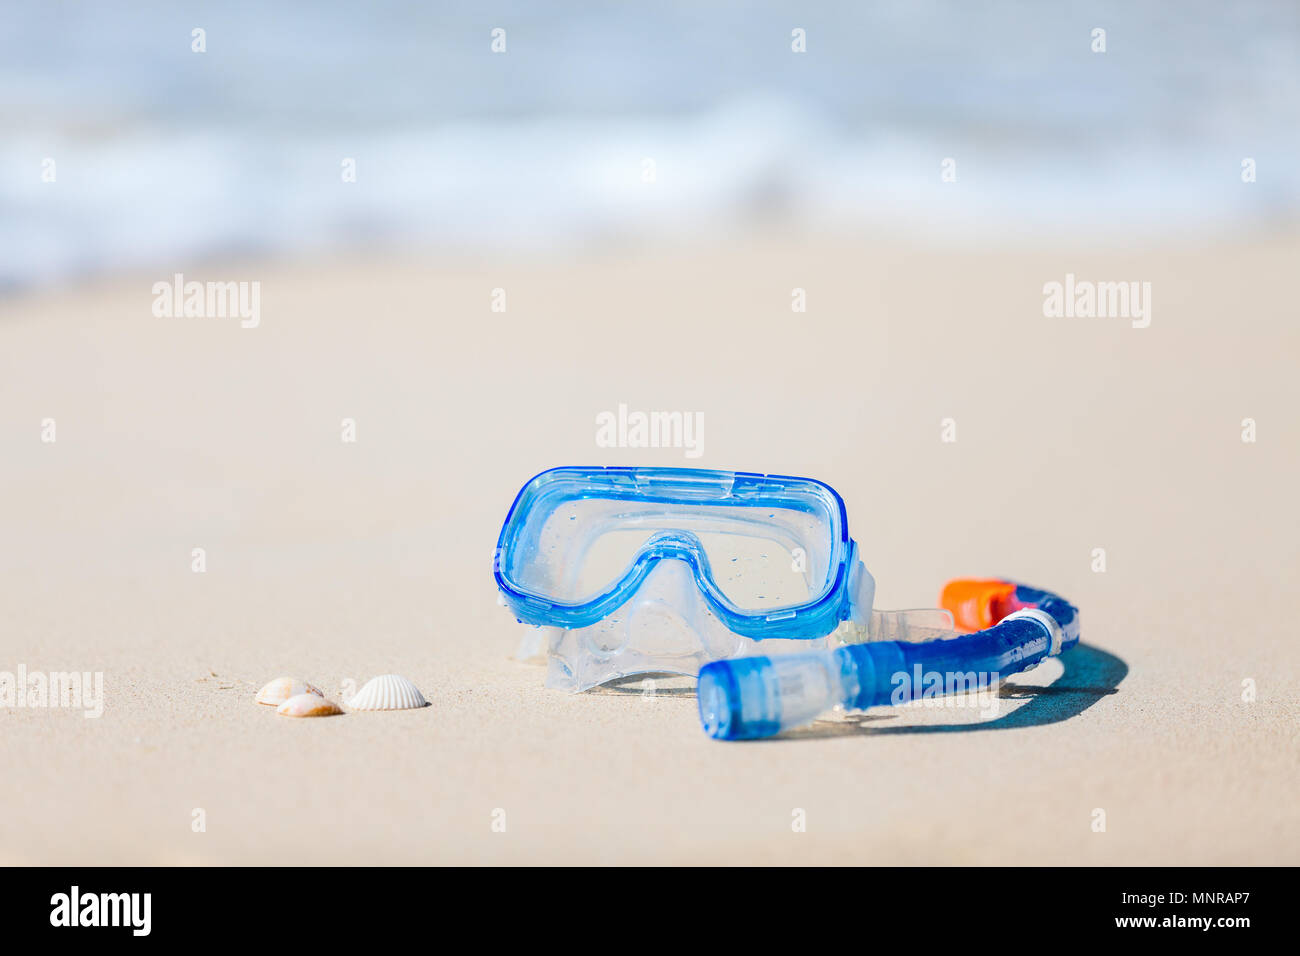 Snorkeling equipment mask and snorkel on tropical white sand beach Stock Photo